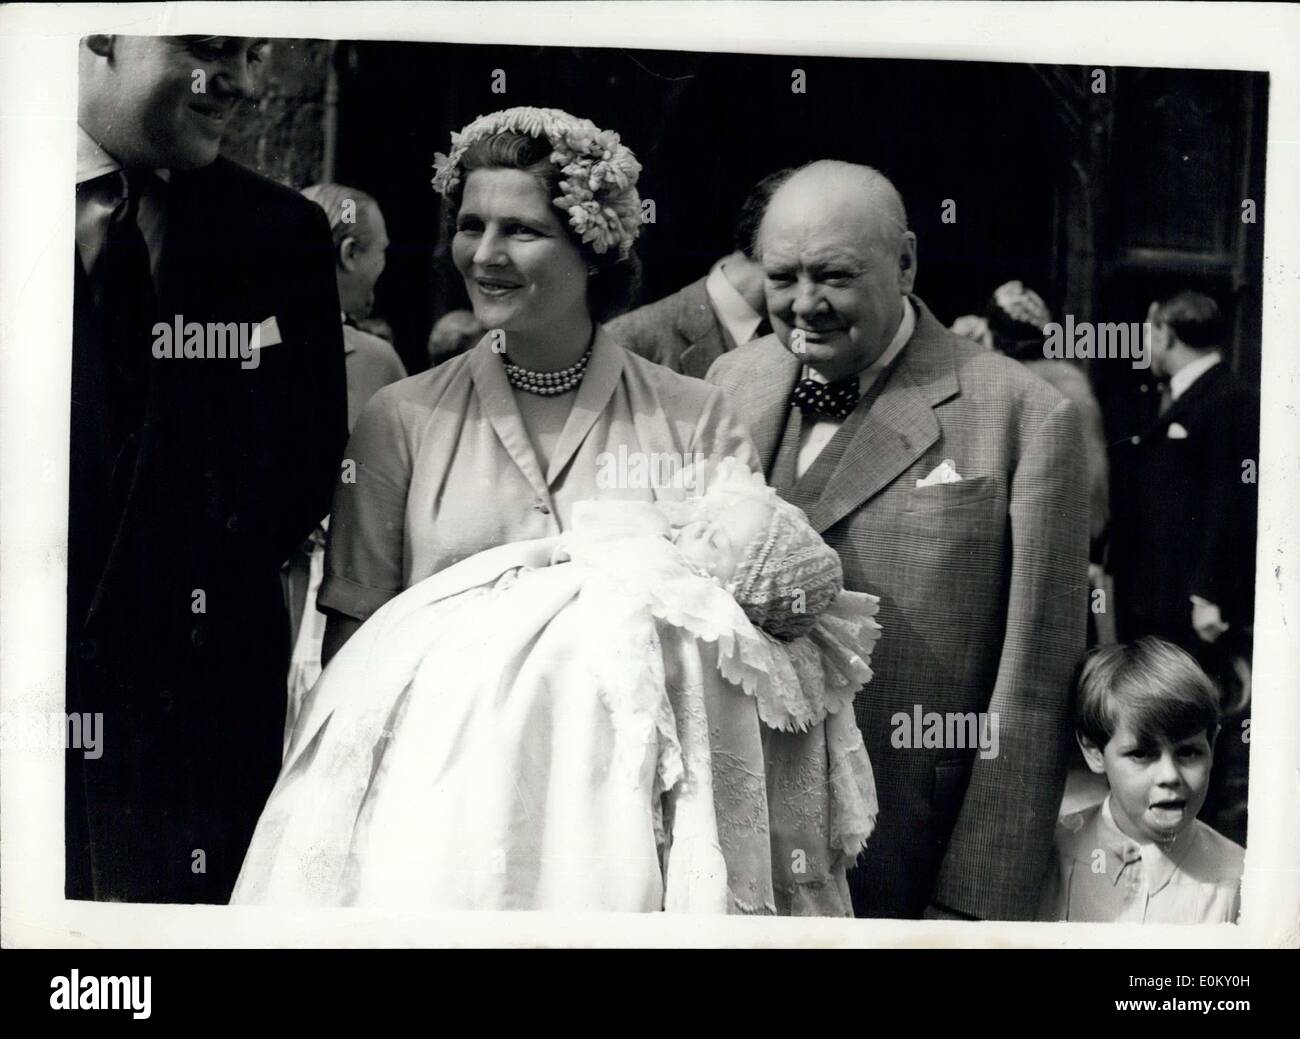 Aug. 17, 1952 - Churchill's Grandson chirstened: Mr. Winstons Churchill's eight grandchild, the two months old son of Captain and Christopher Soames and his wife Mary, daughter of Mr. Churchill, was christened today at Westerham Parish Church. One of the baby's names is Bernard, in honor of Viscount Montgomery who was a grandfather and the other is Jeremy, by which he will be known. Photo shows Mr. Winston Churchill and his daughter May, who is holding her son, after the christening today. Stock Photo